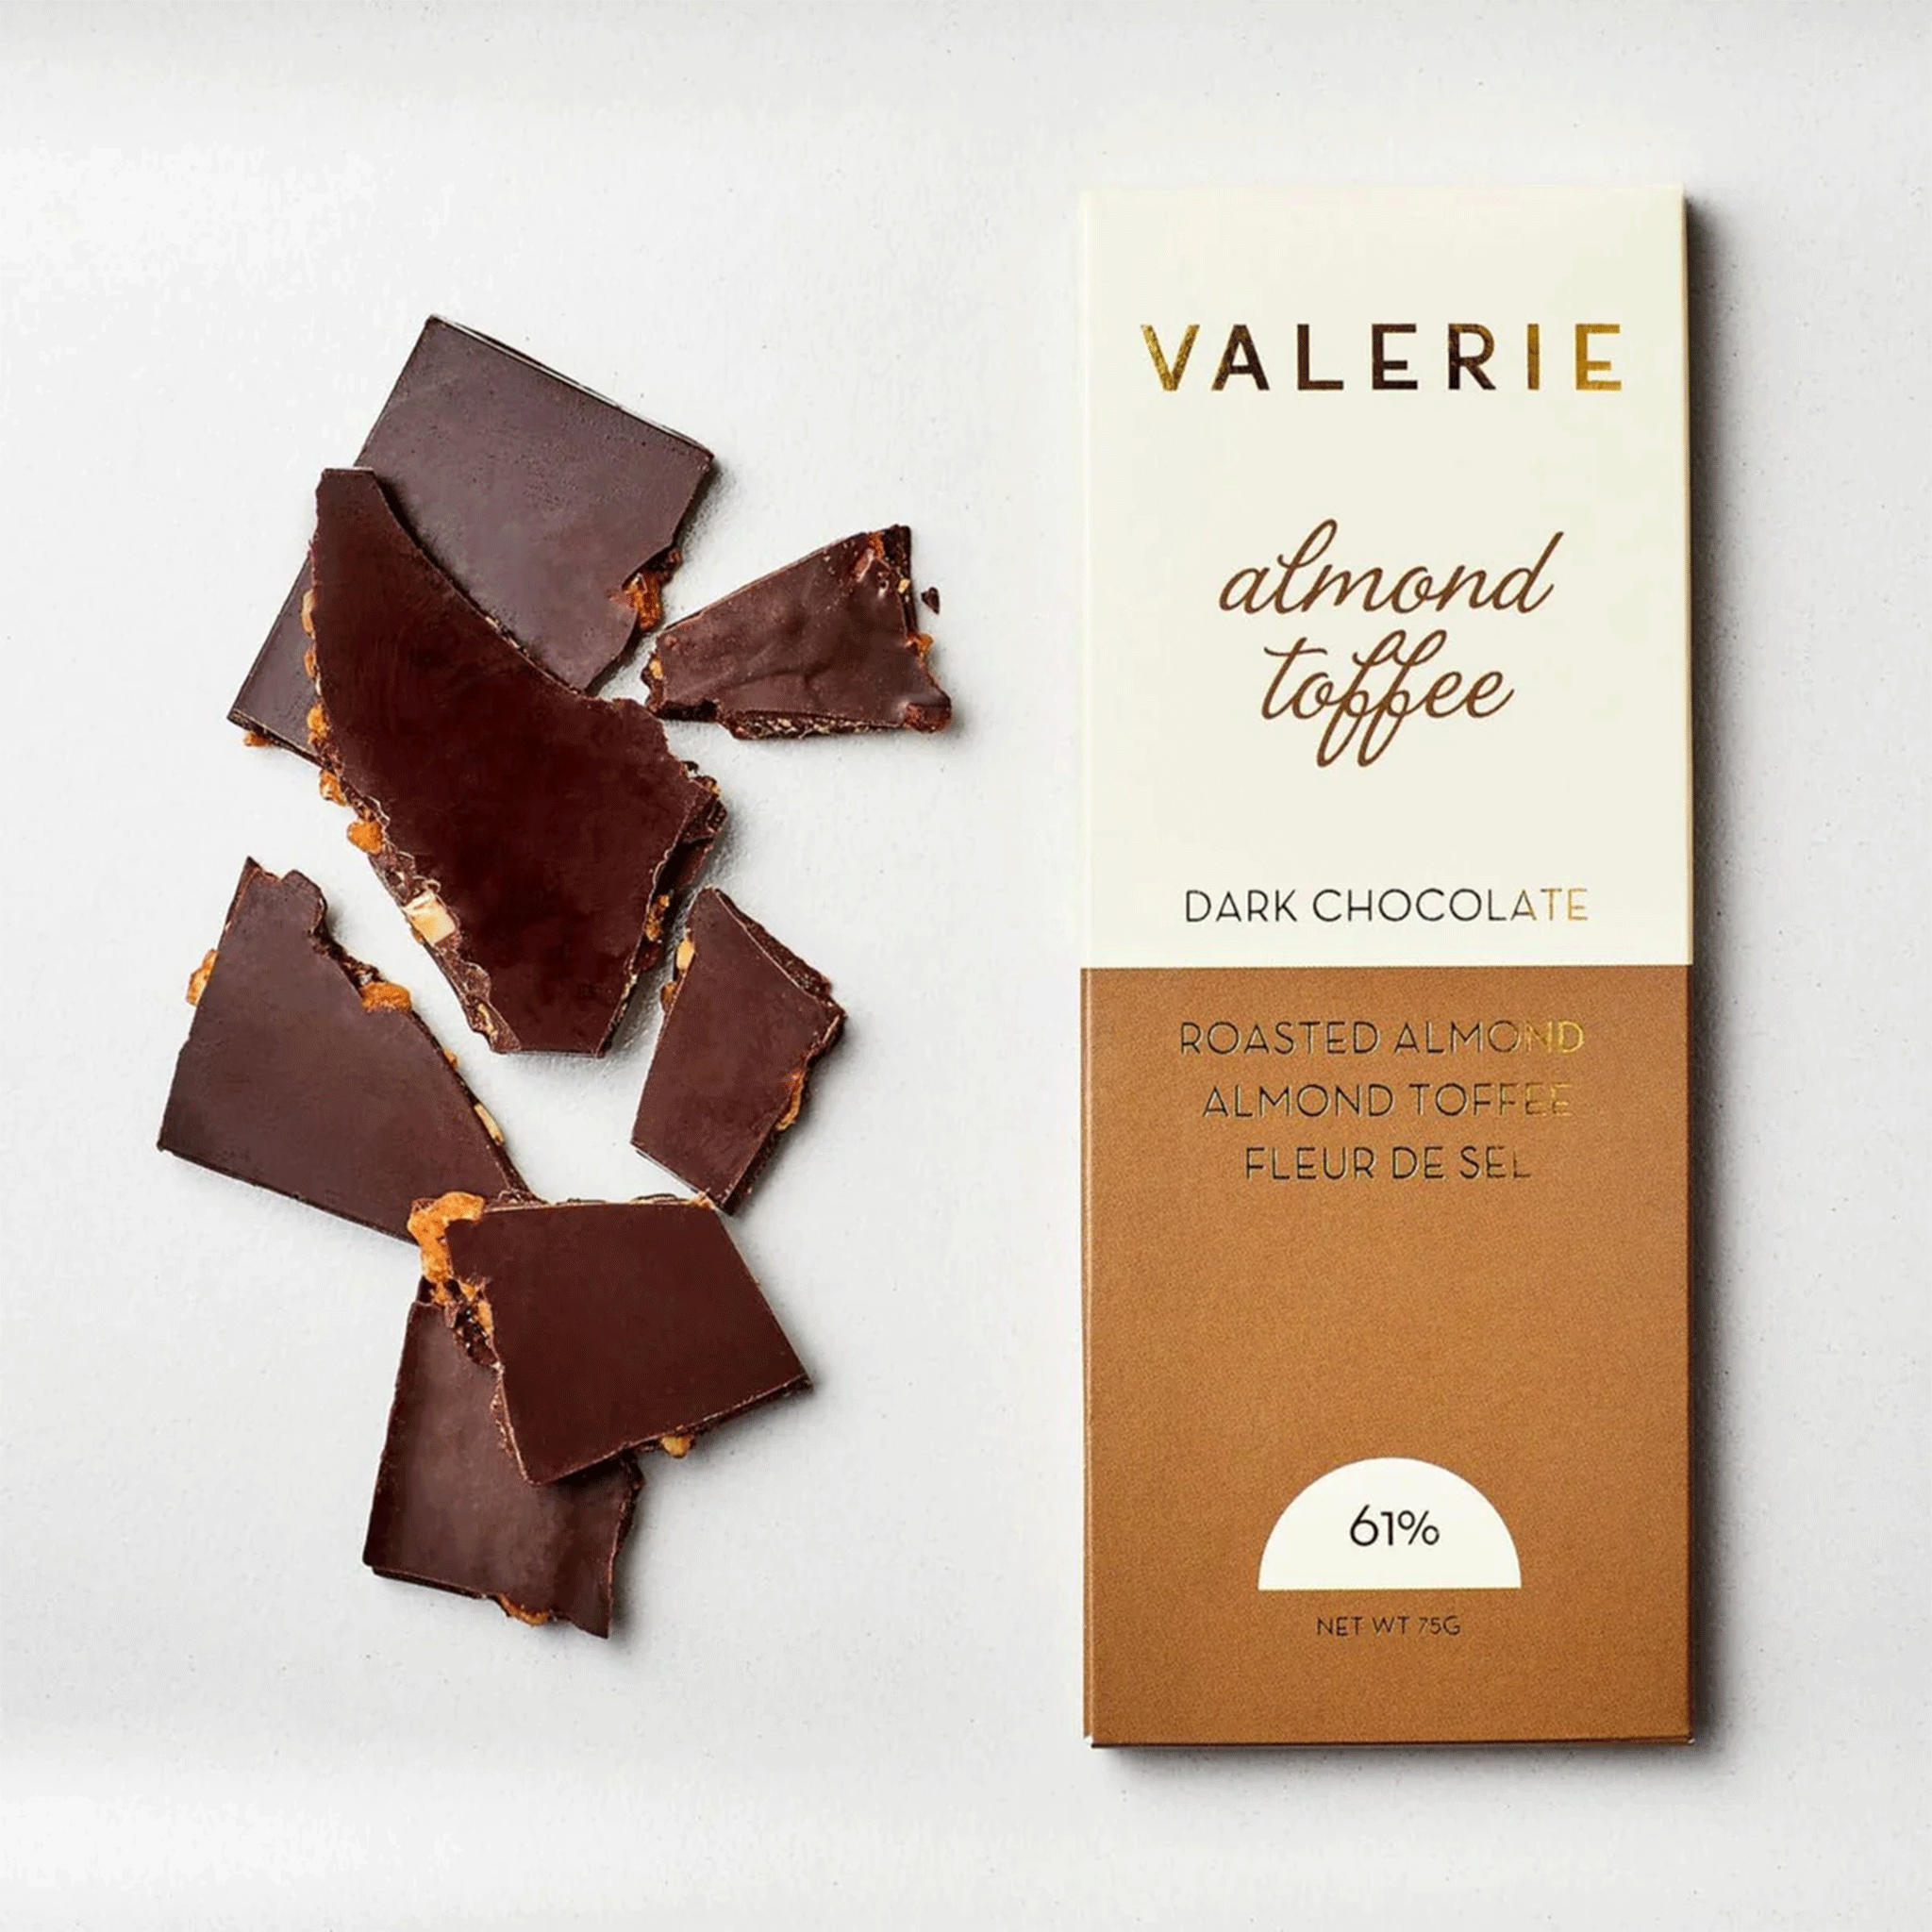 On a white background is a chocolate bar with tan and ivory packaging along with gold foil text that reads, "Valerie almond toffee Dark Chocolate Roasted Almond Almond Toffee Fleur De Sel".